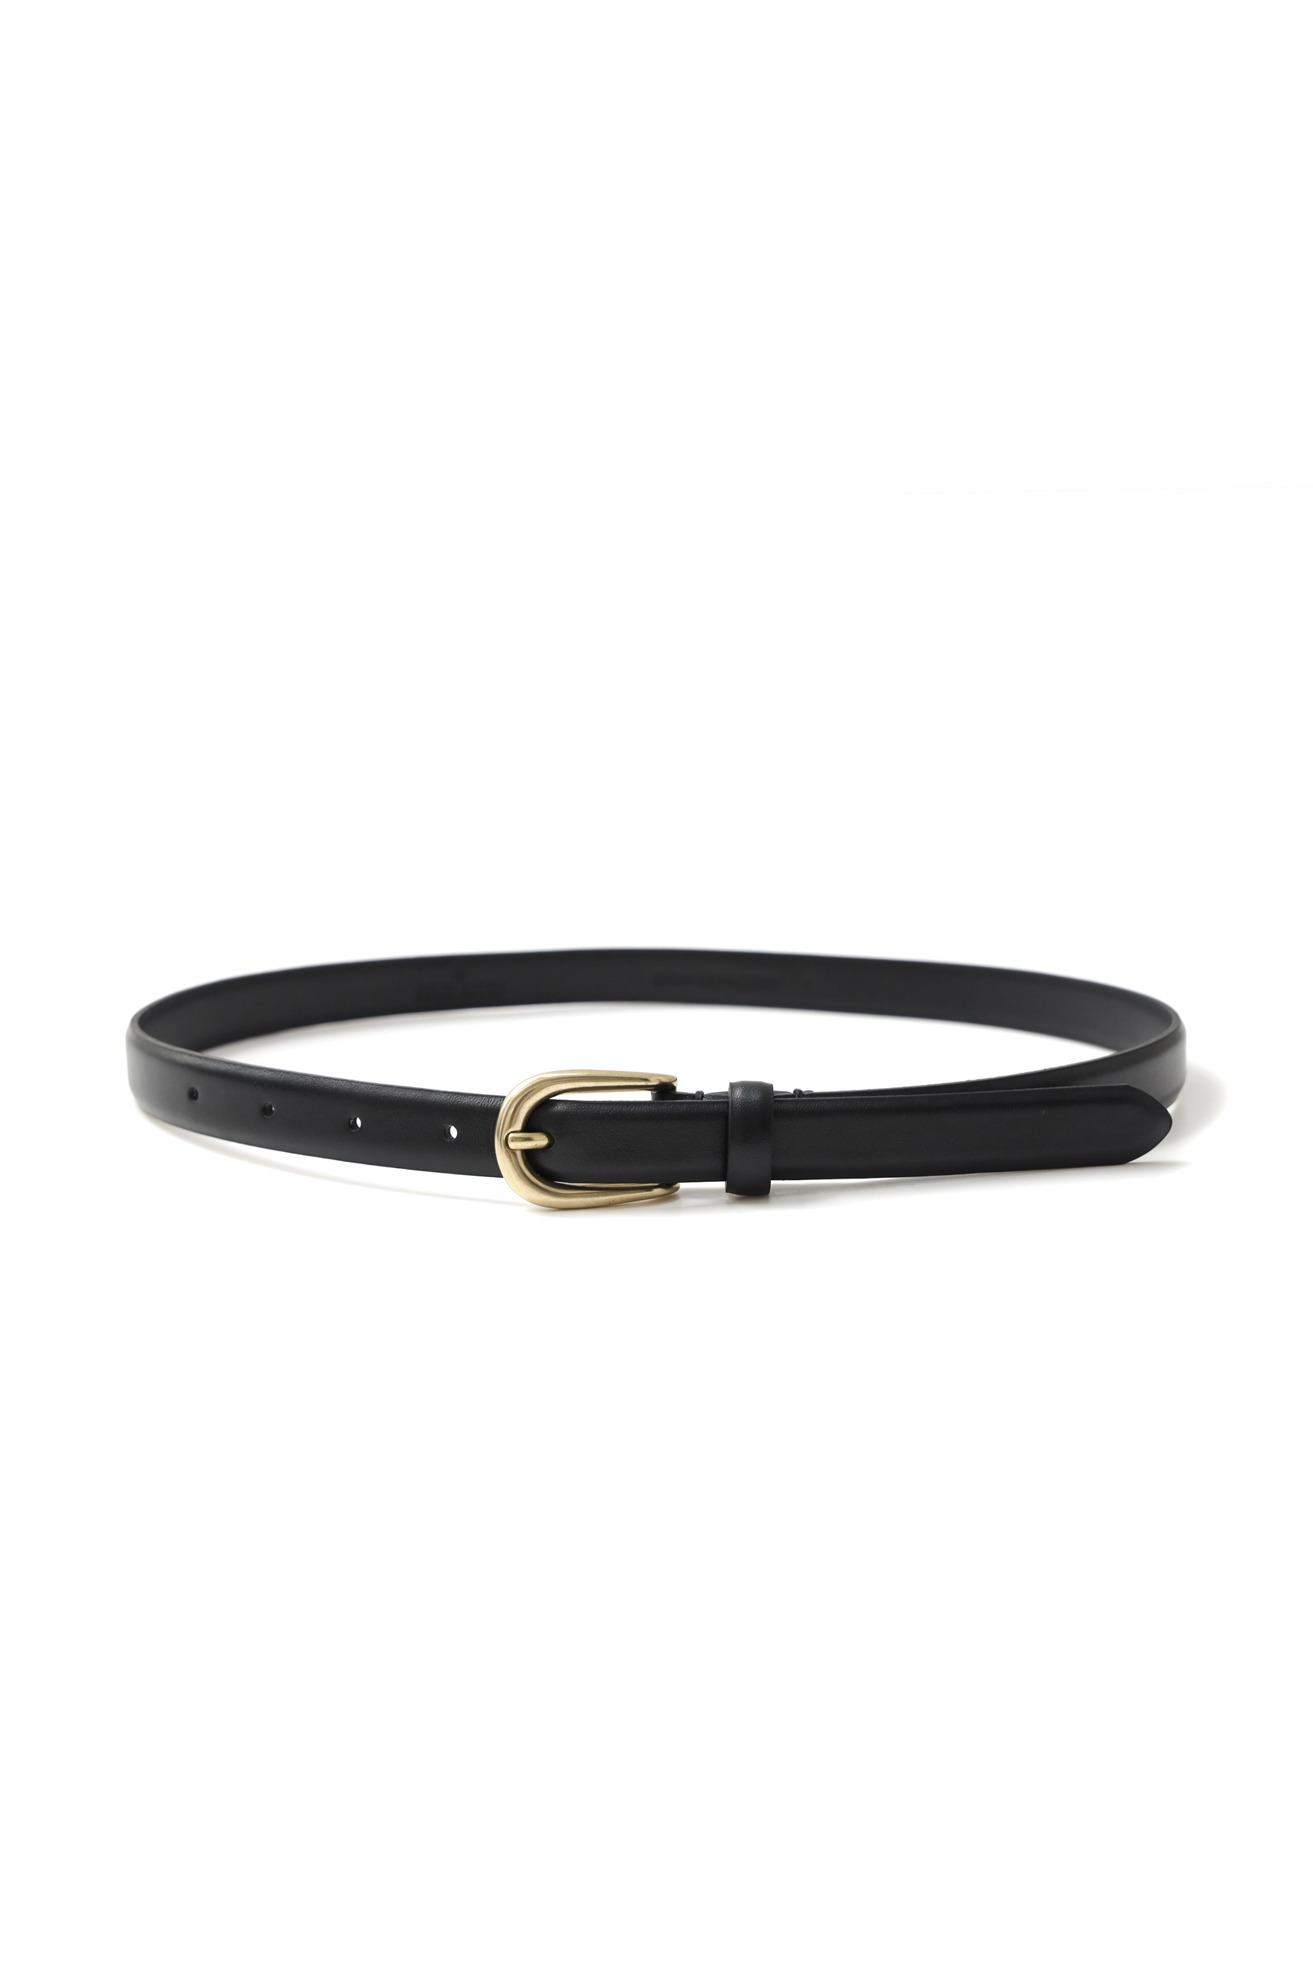 Italy Brass Leather Belt  (GOLD)